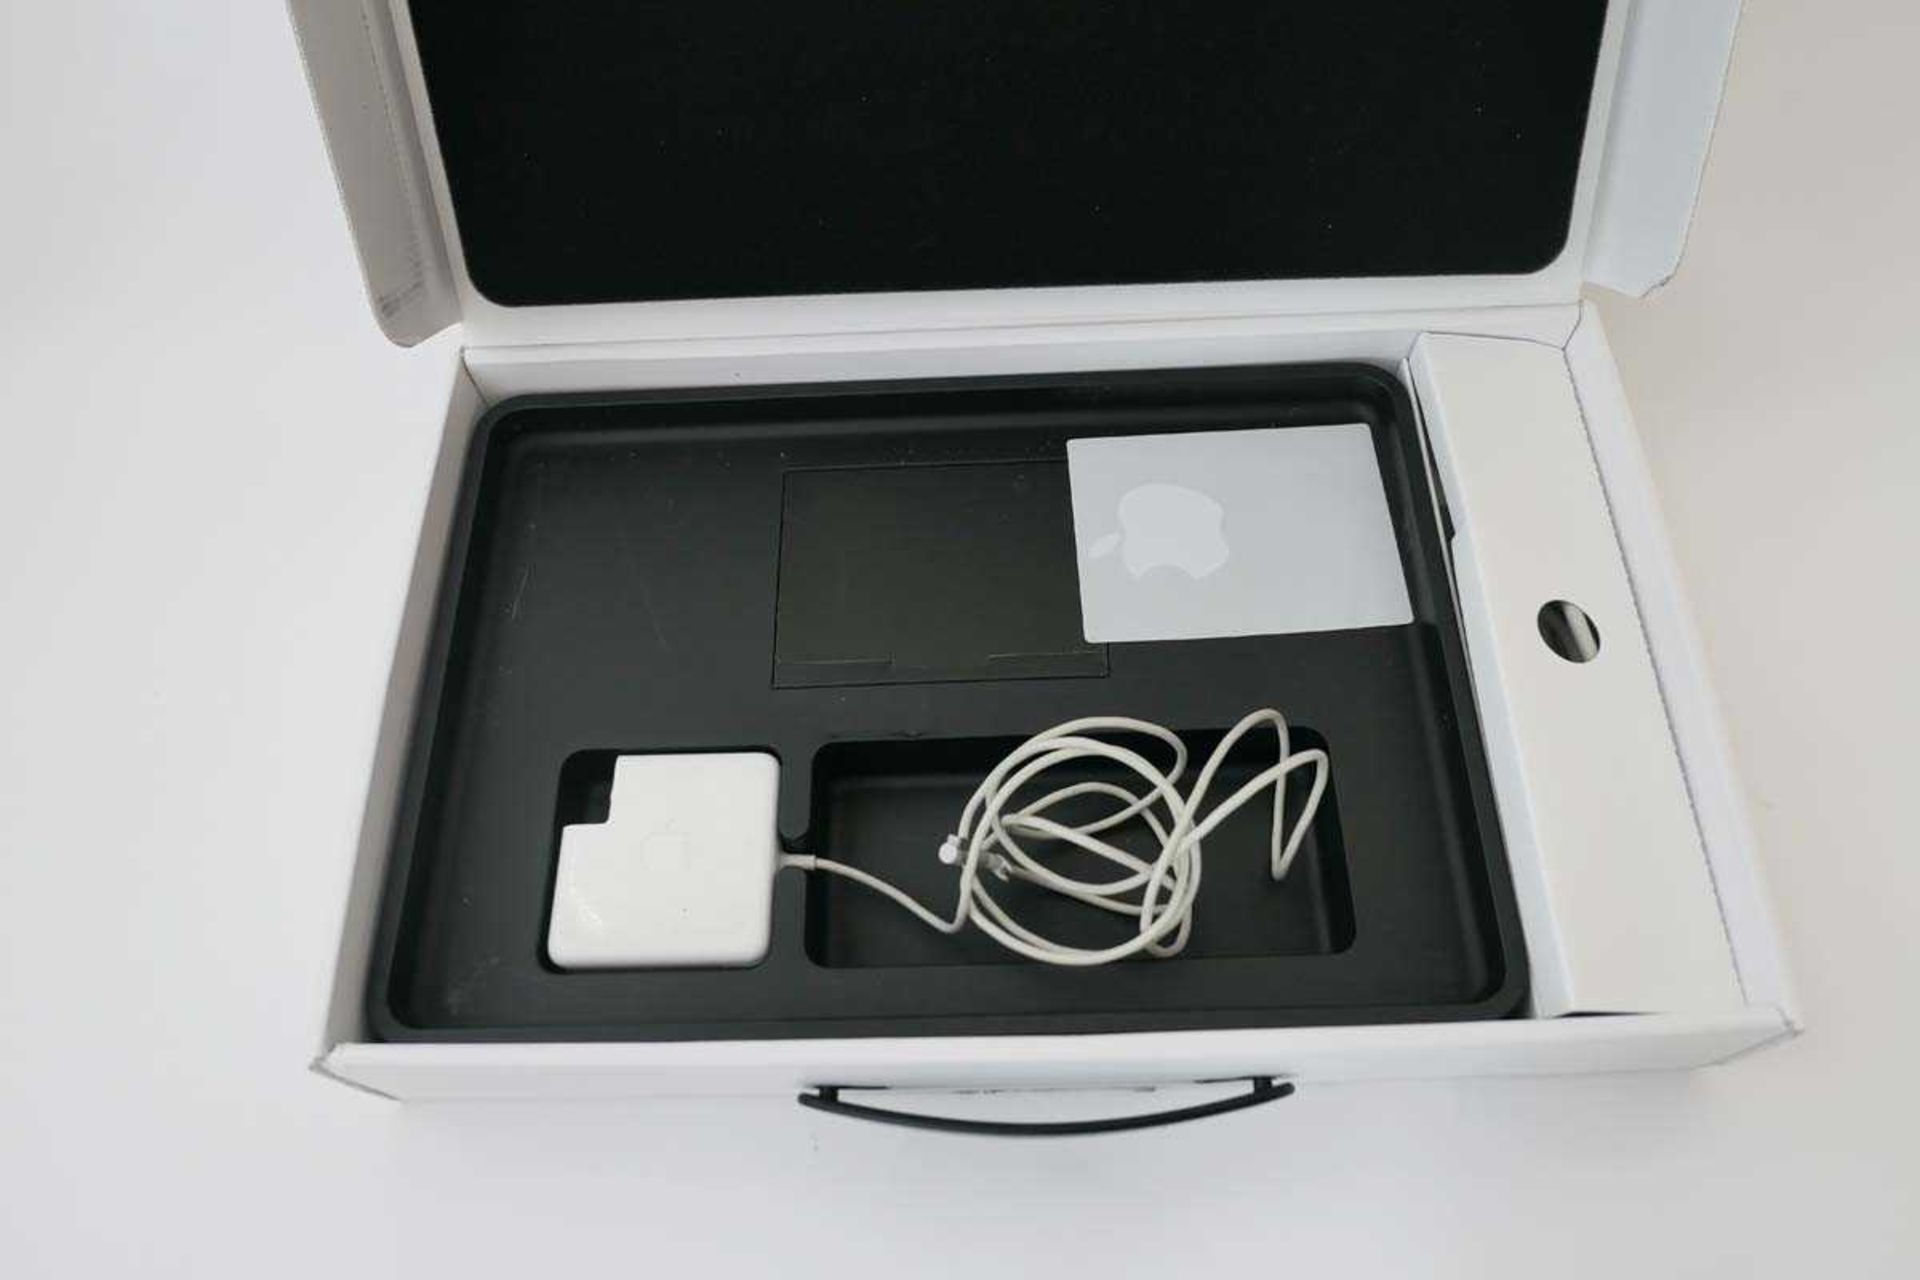 +VAT MacBook Pro 15.4" 2012 A1286 Silver laptop with Intel i7, 8GB RAM, 256GB SSD, box and PSU - Image 6 of 6